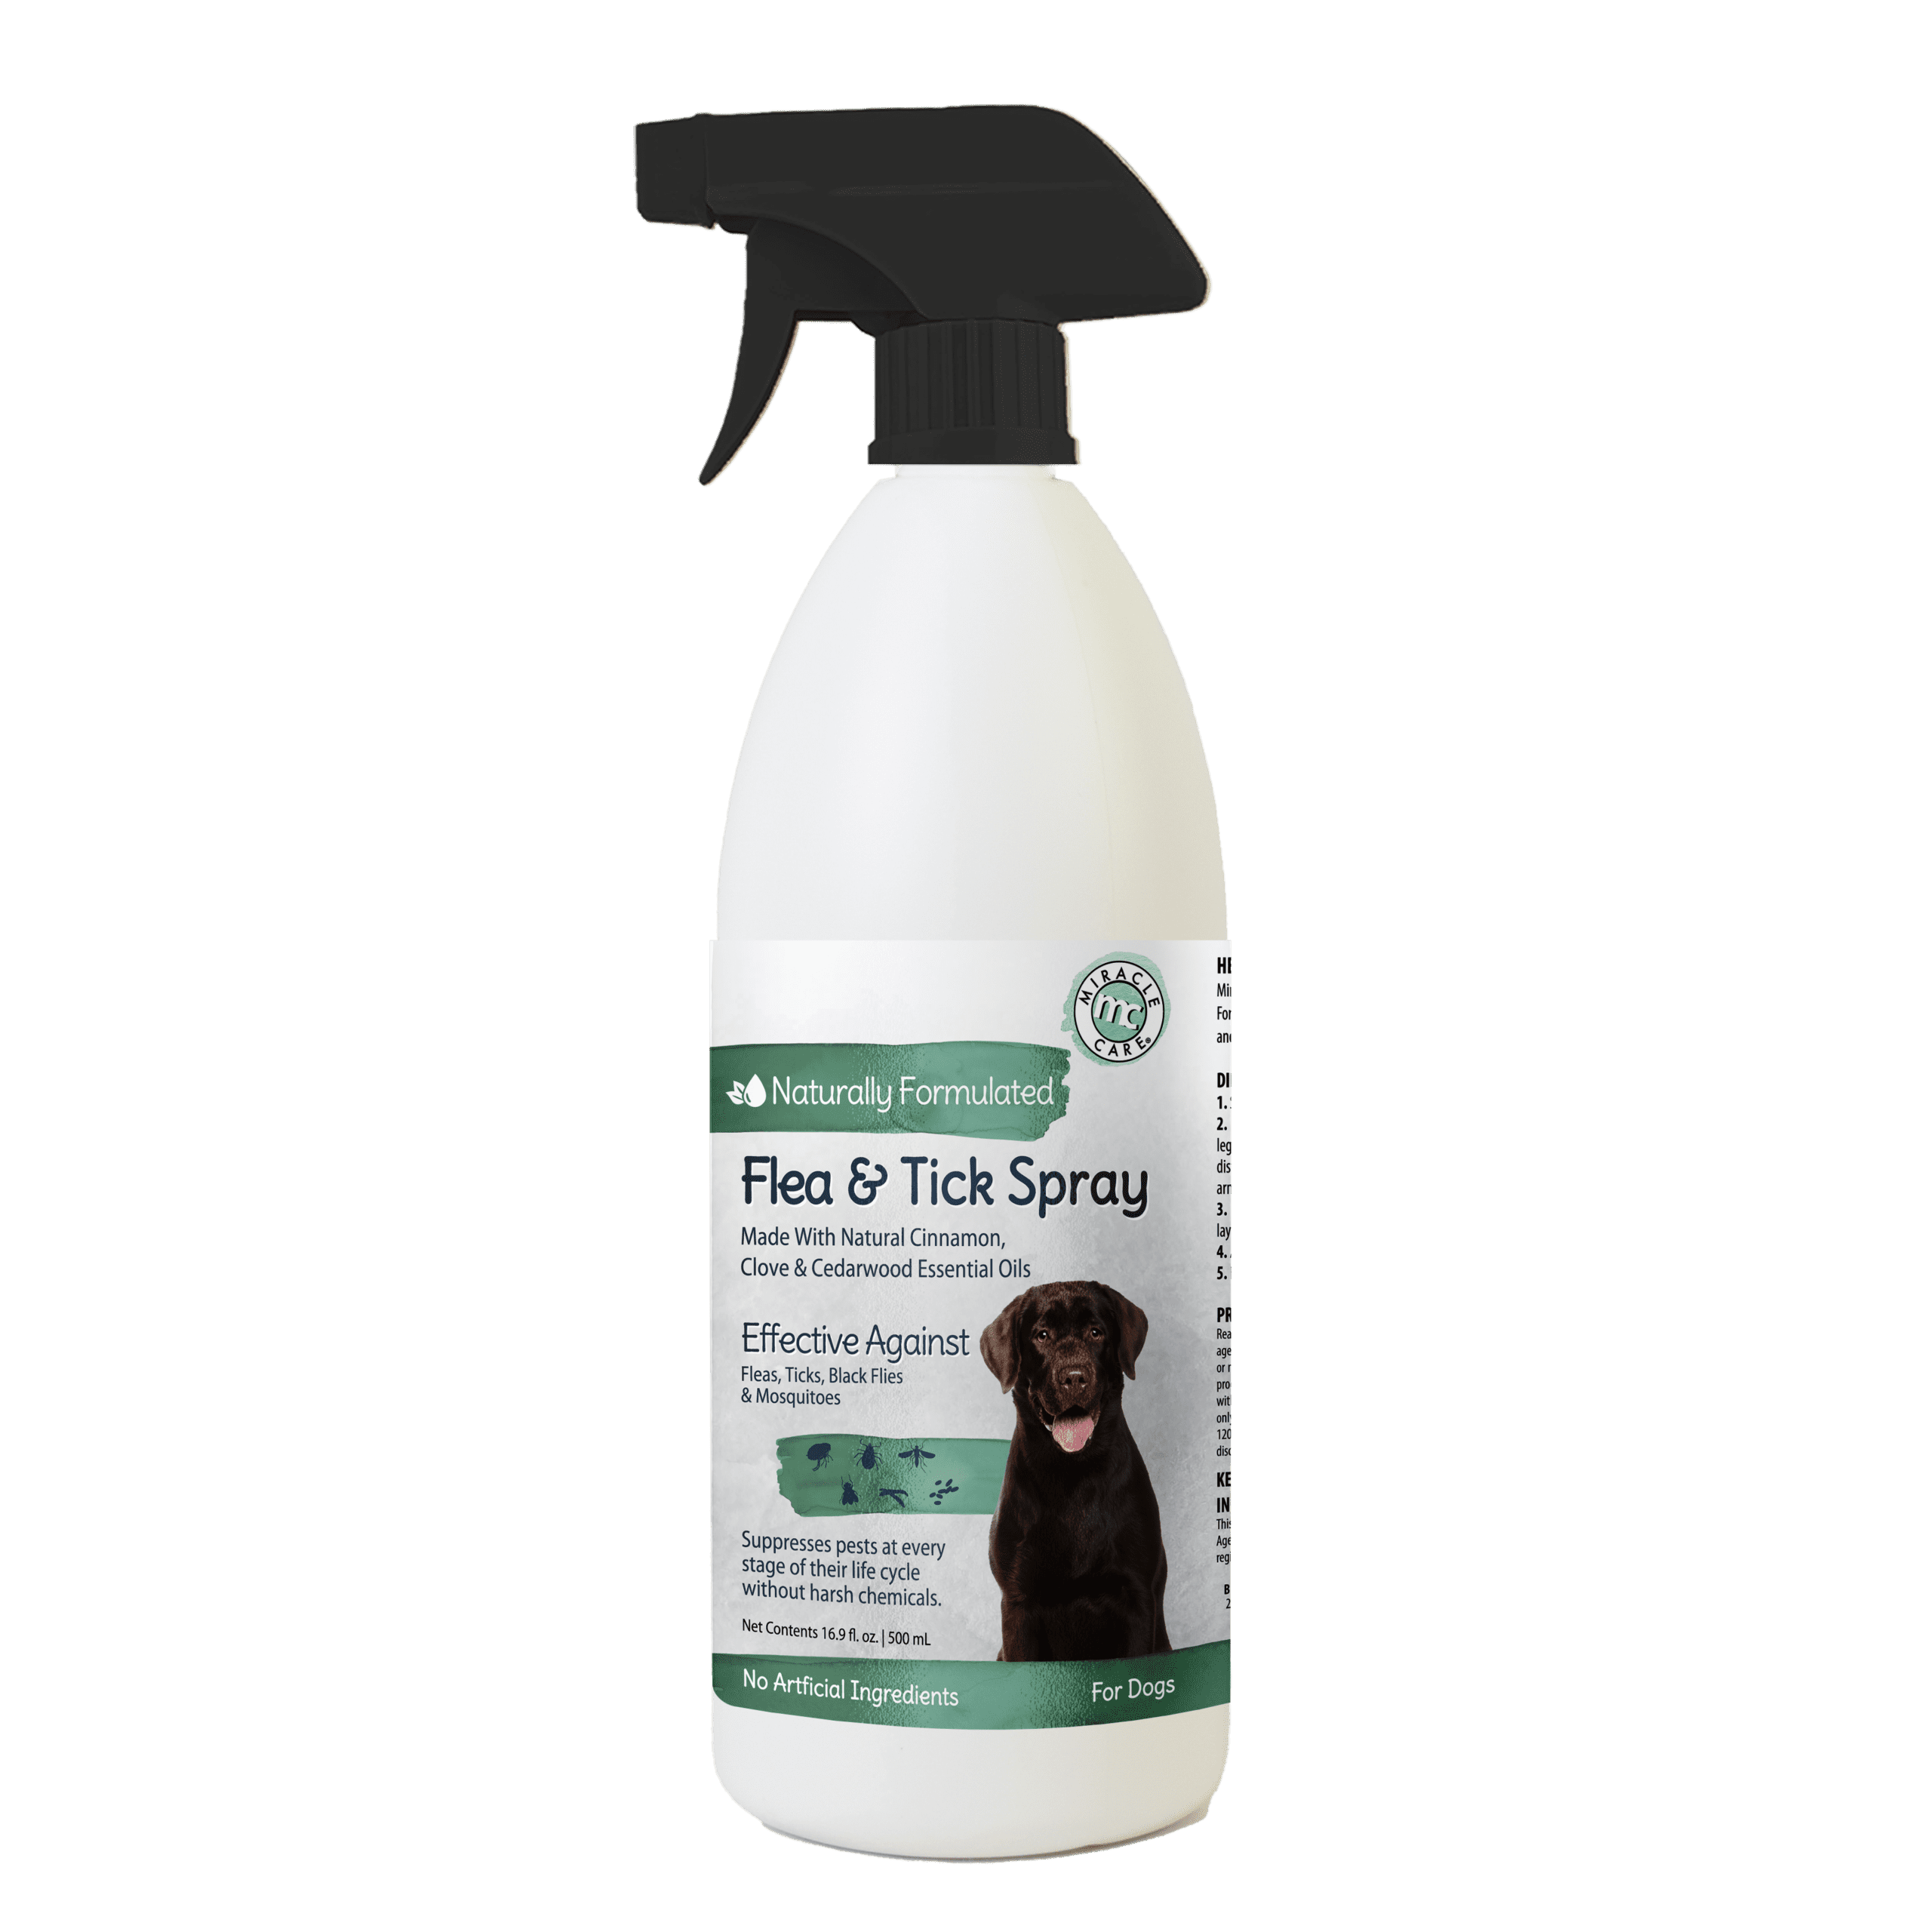 Black Fly Repellent For Dogs